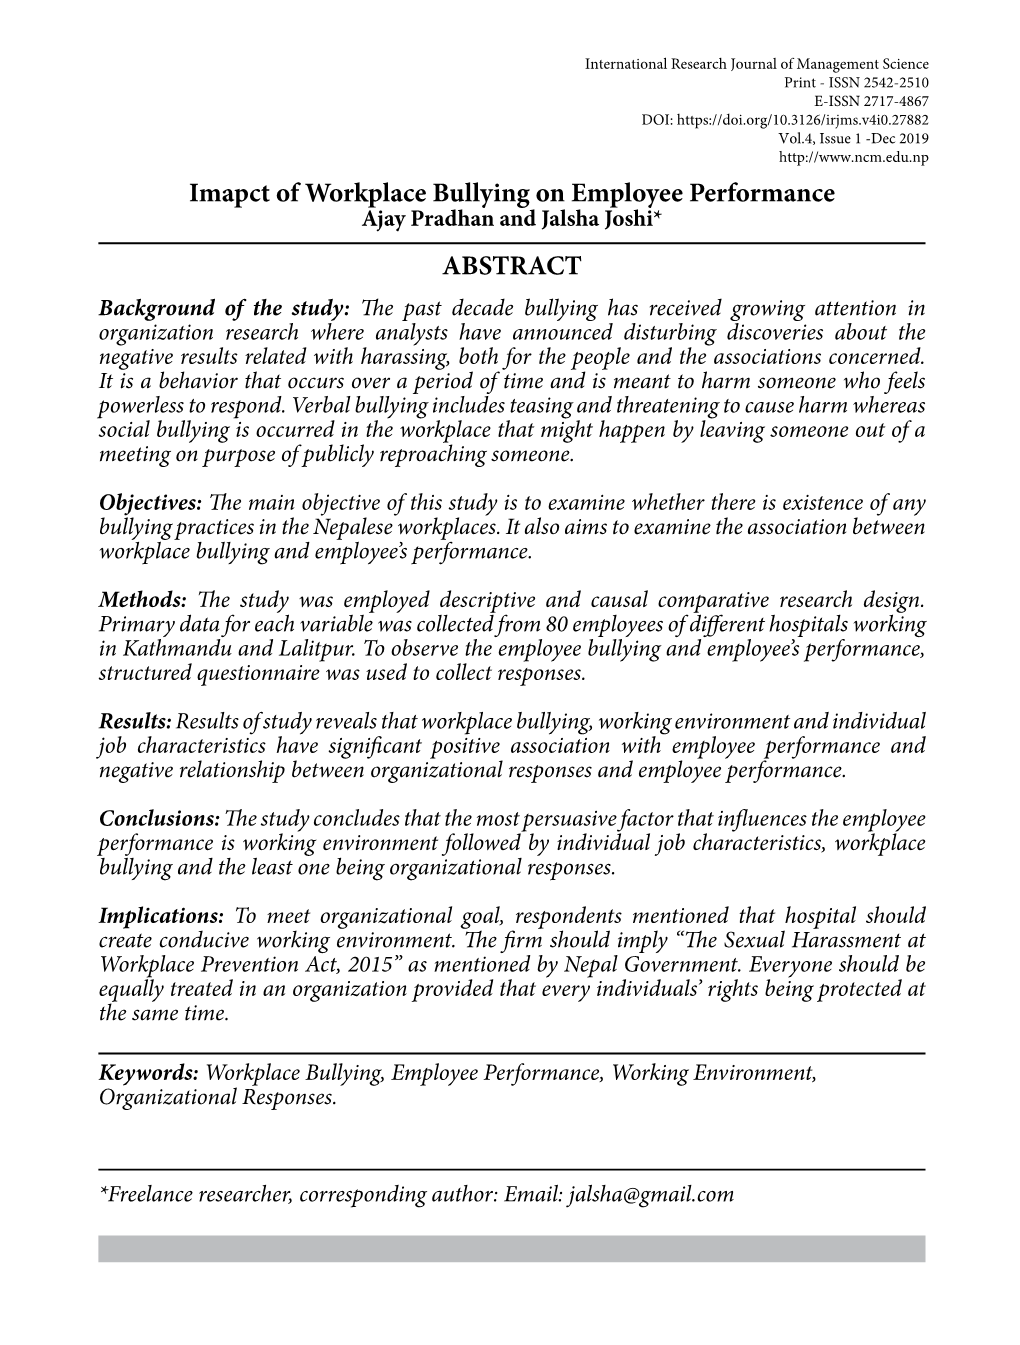 Imapct of Workplace Bullying on Employee Performance ABSTRACT